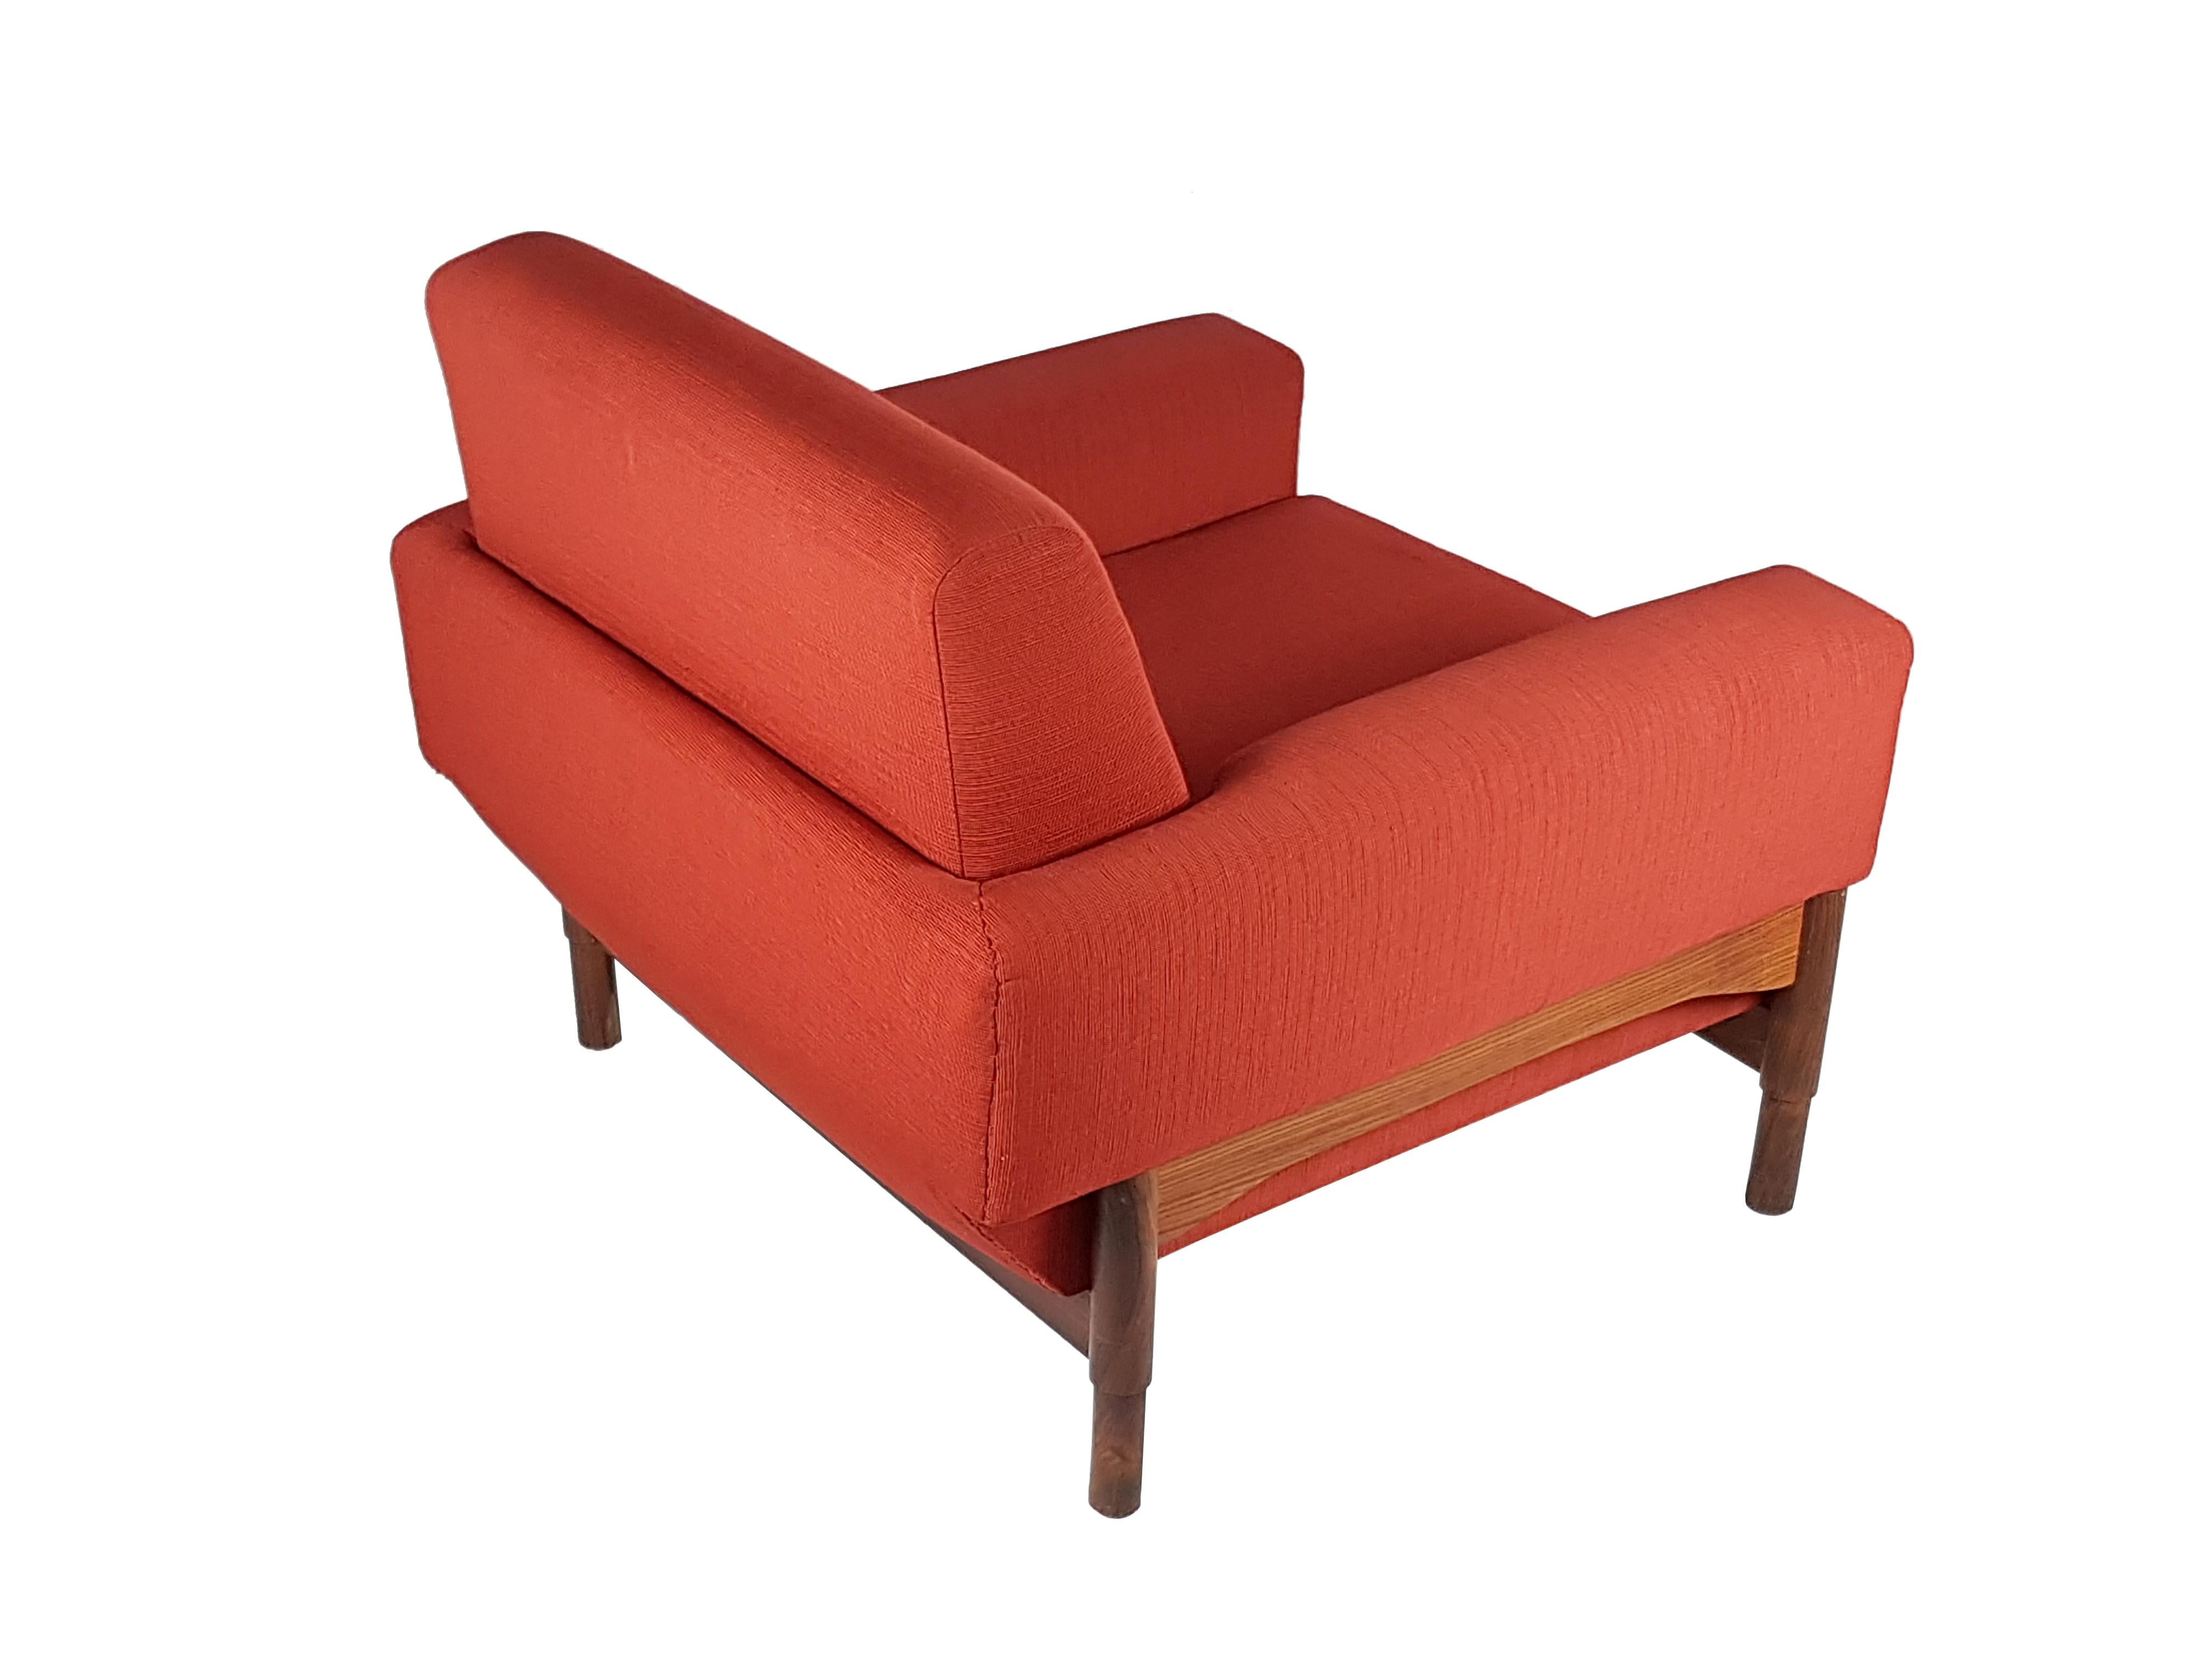 Pair of Wood & Brick Red Fabric 1960 Armchair by S. Saporiti for F.Lli Saporiti For Sale 2